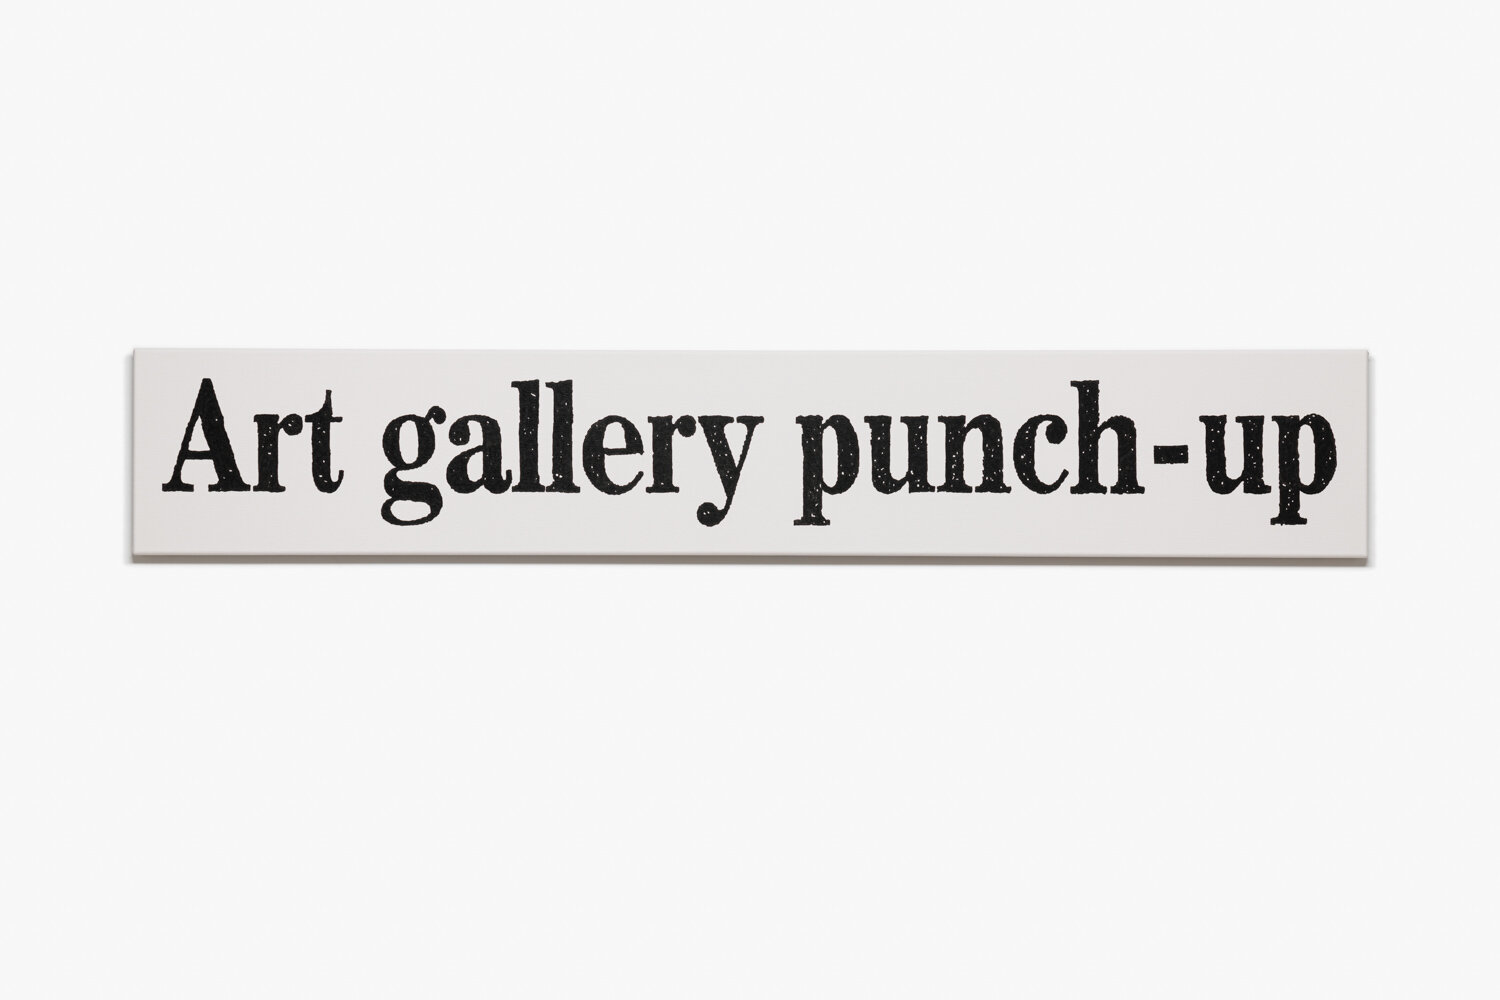 Art gallery punch-up (August 1, 1993) 2021